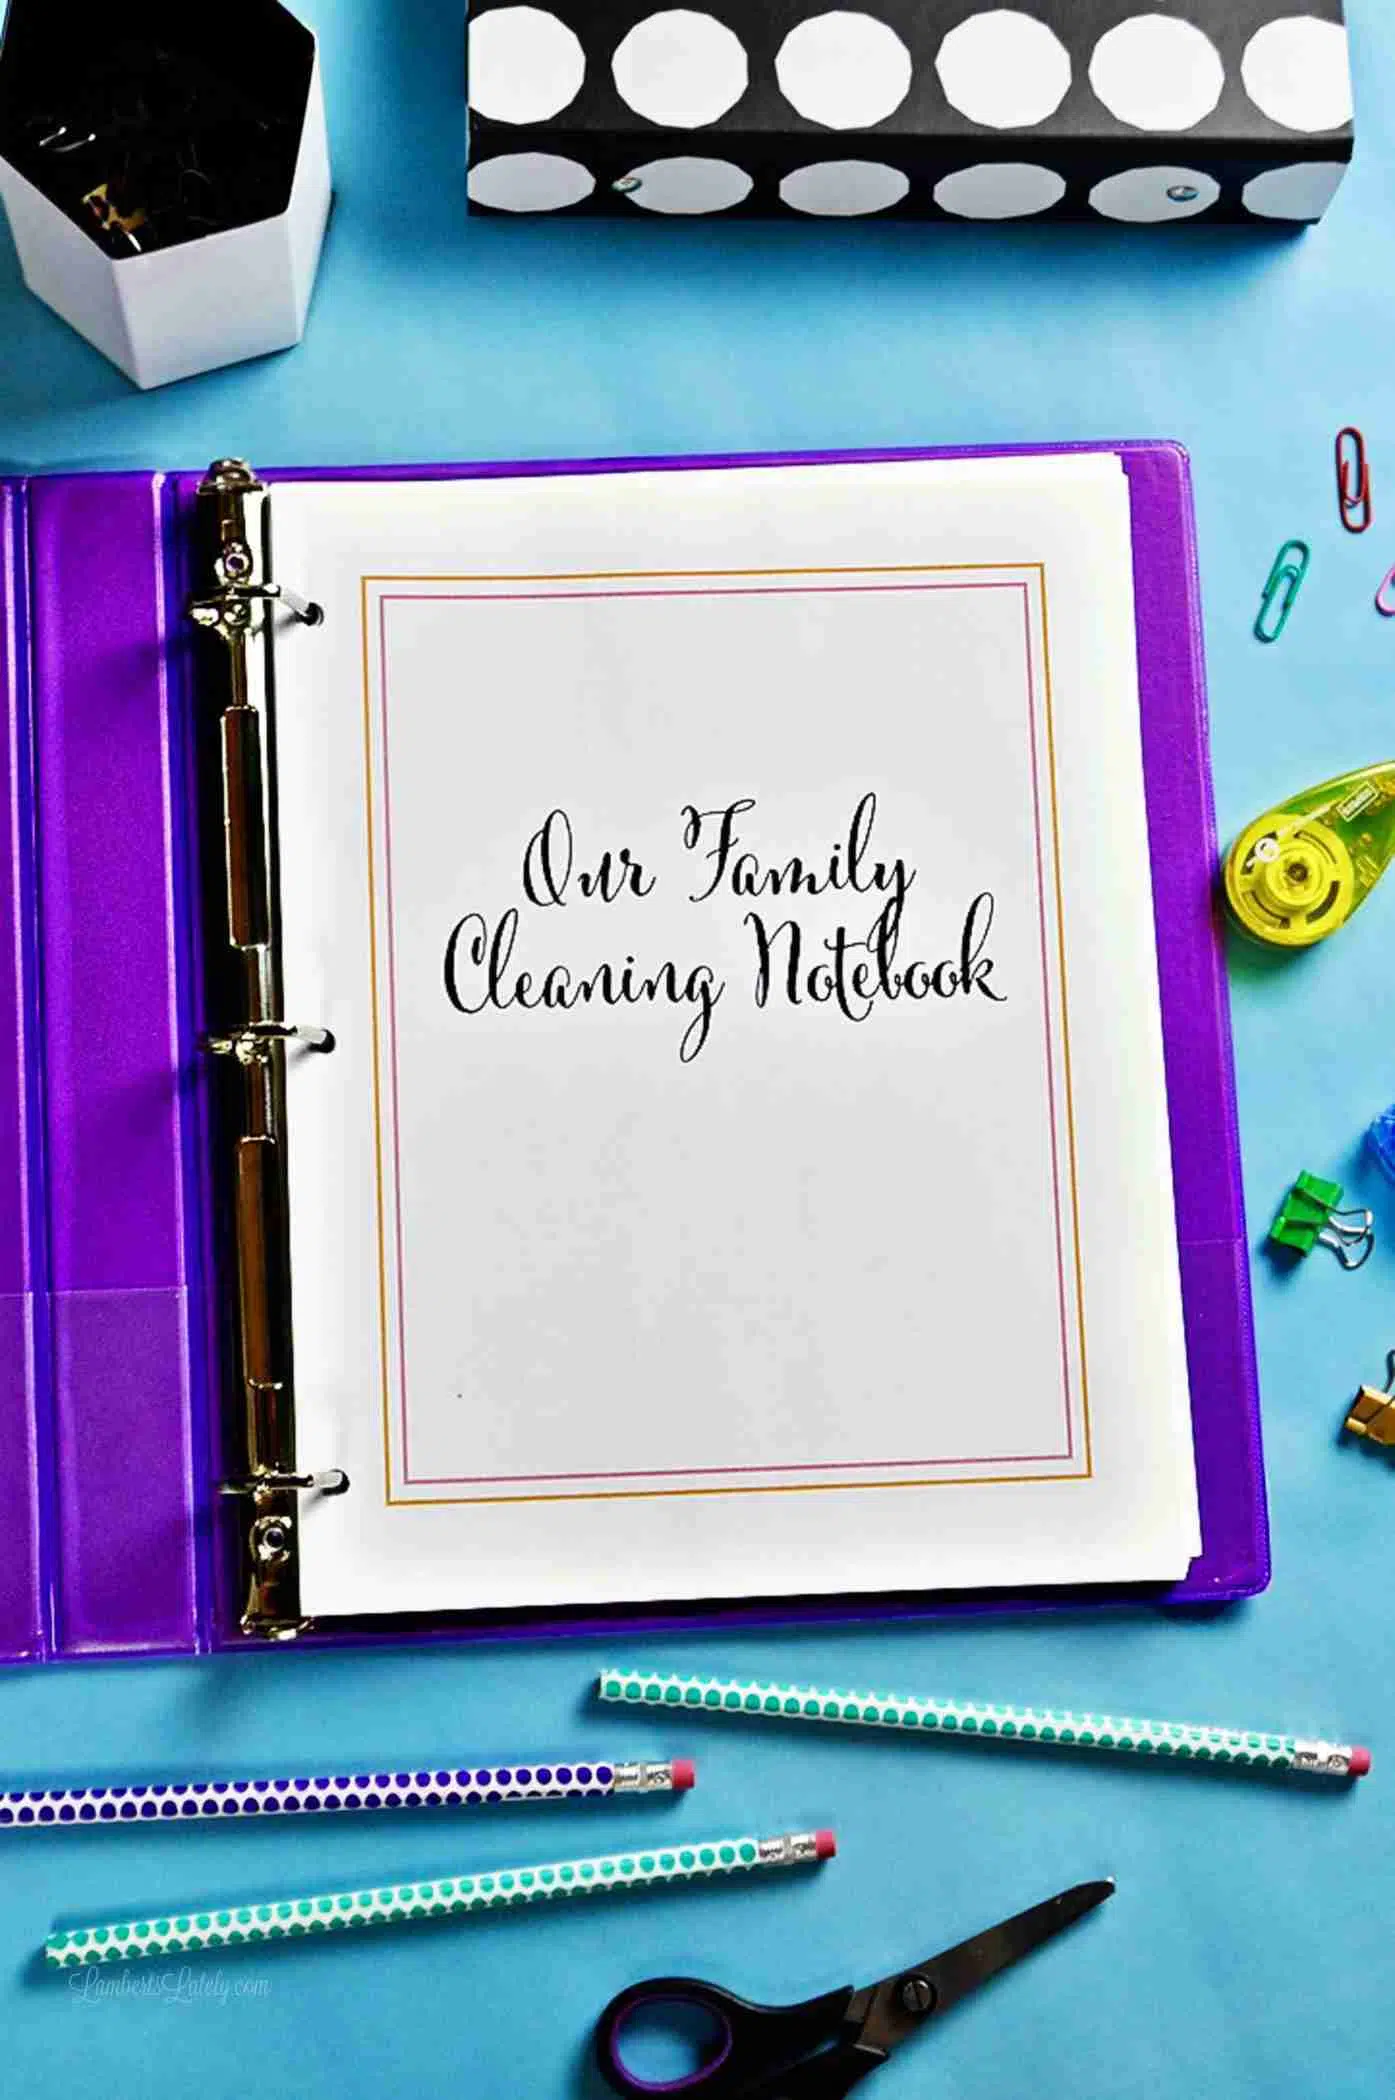 Our family cleaning notebook cover sheet